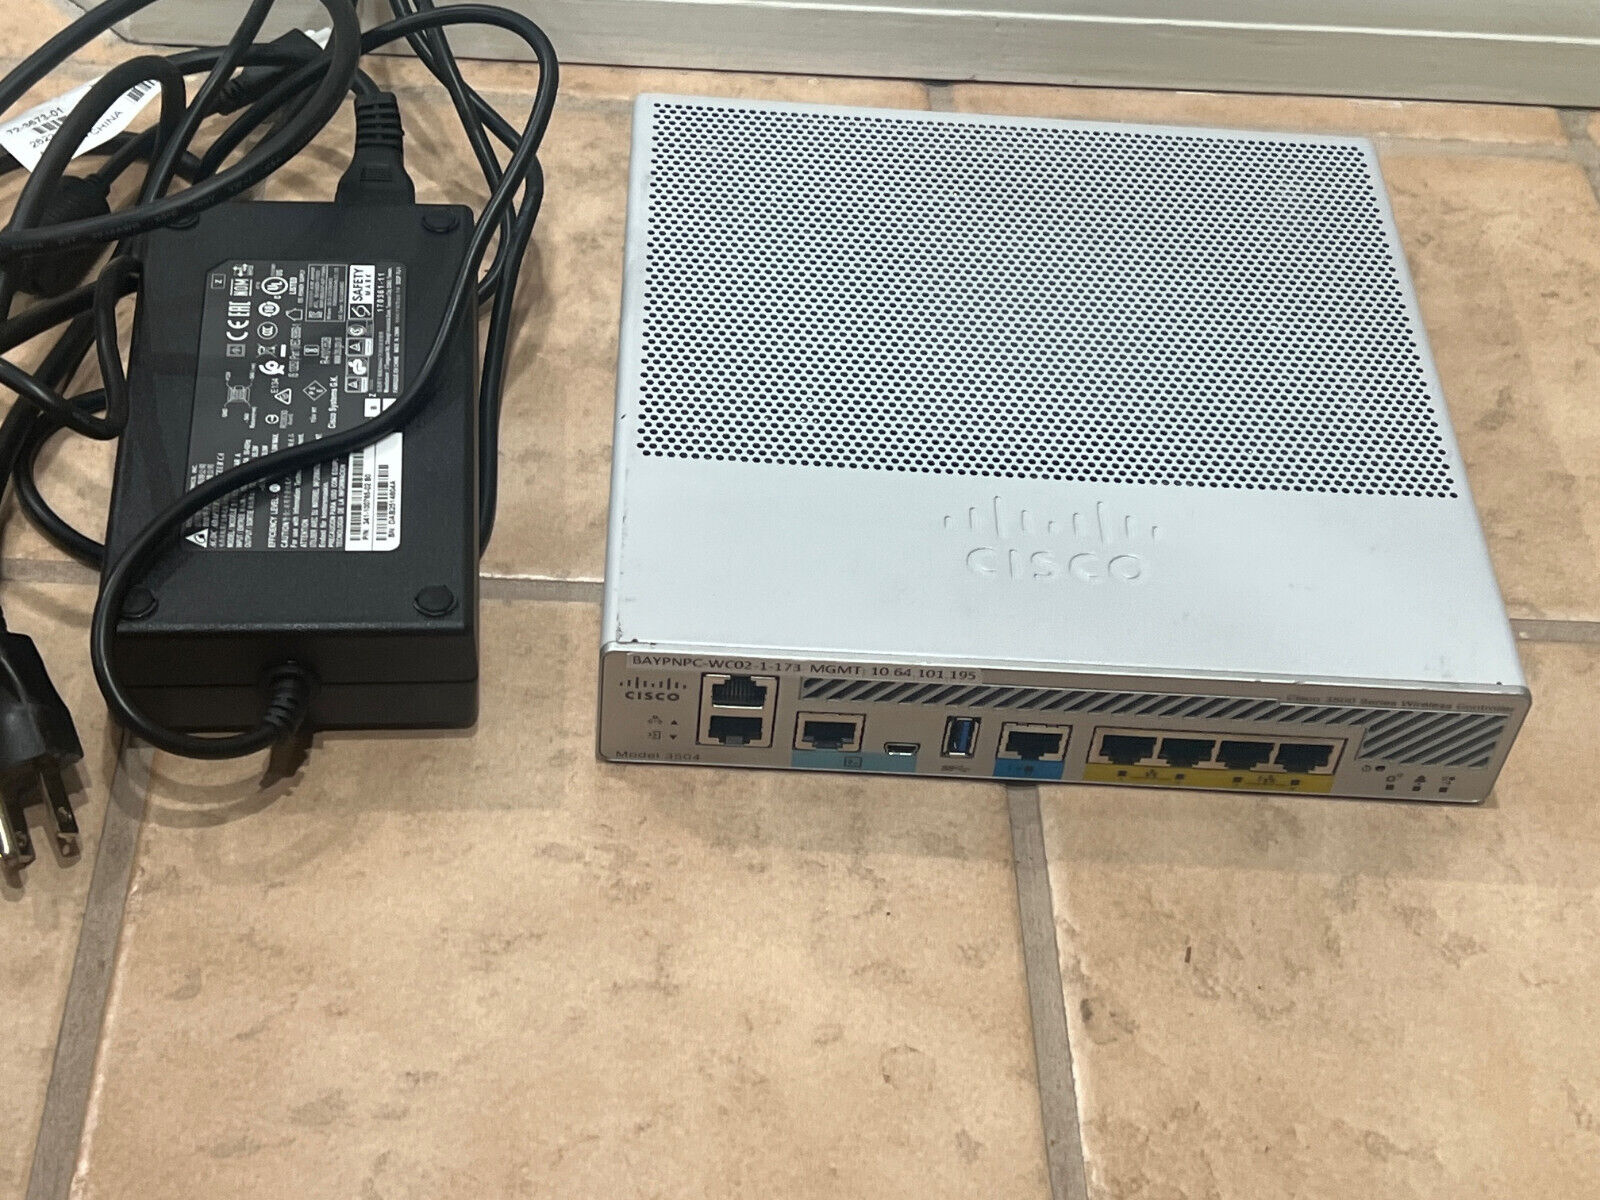 Cisco 3504 Wireless LAN Controller with Power Adapter AIR-CT3504-K9